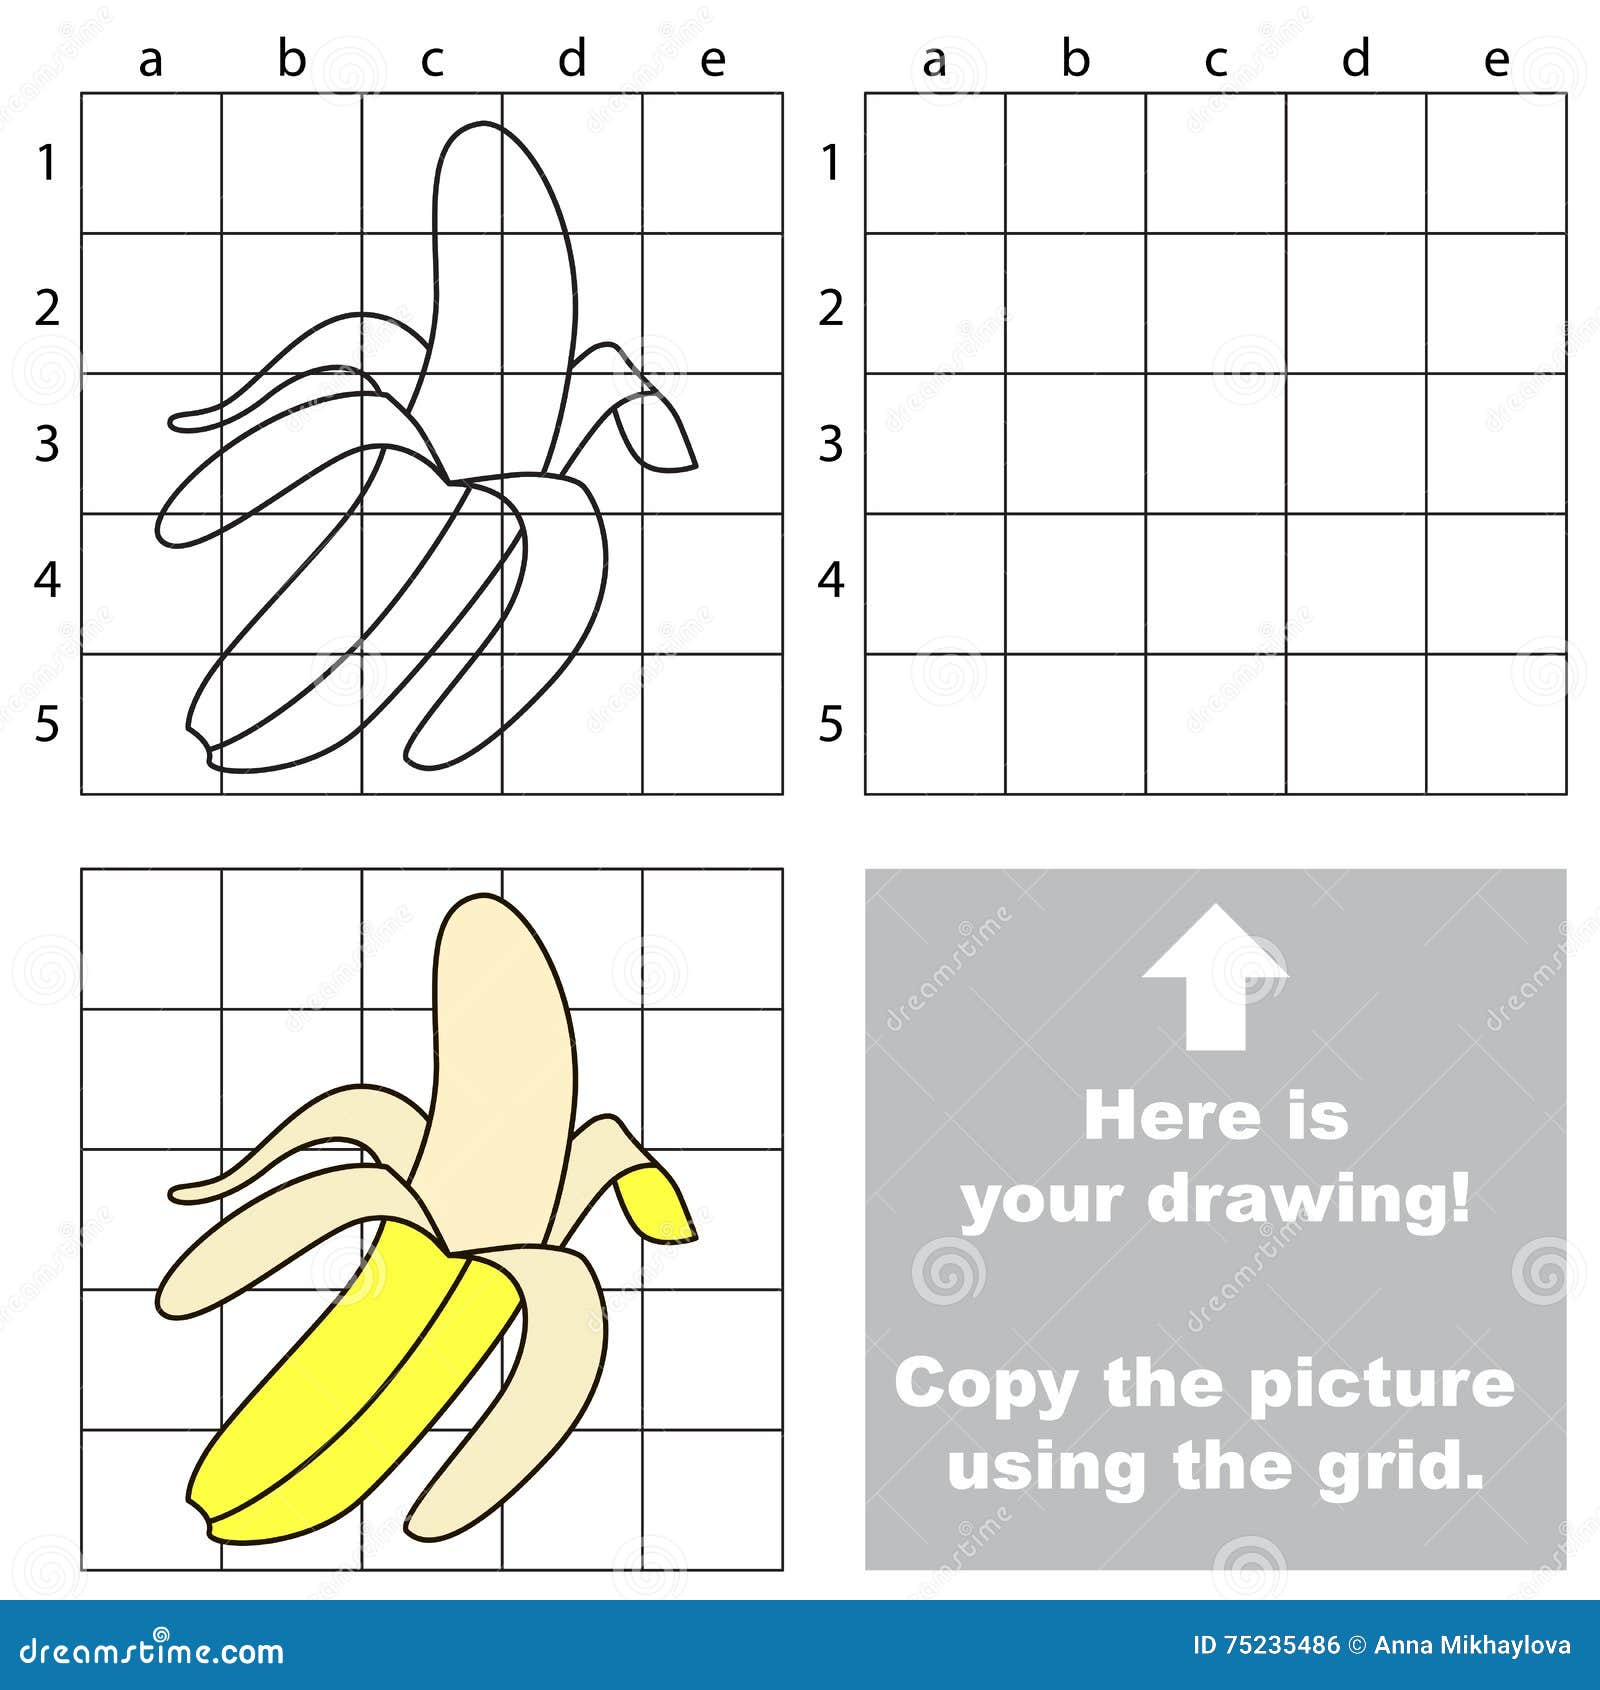 How to Draw a Banana Tree - video Dailymotion